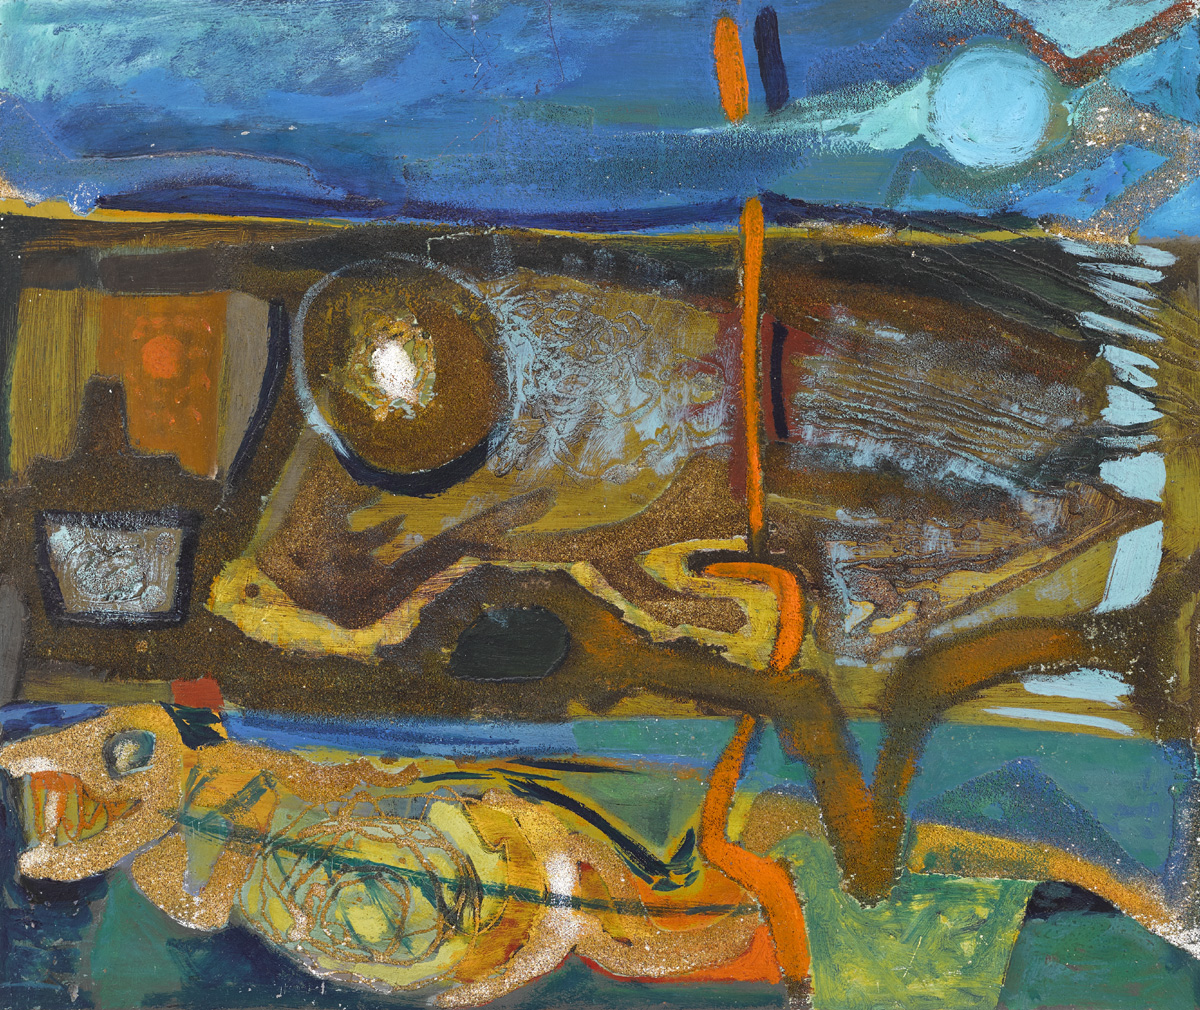 SEA BEAST by Gerard Dillon (1916-1971) (1916-1971) at Whyte's Auctions